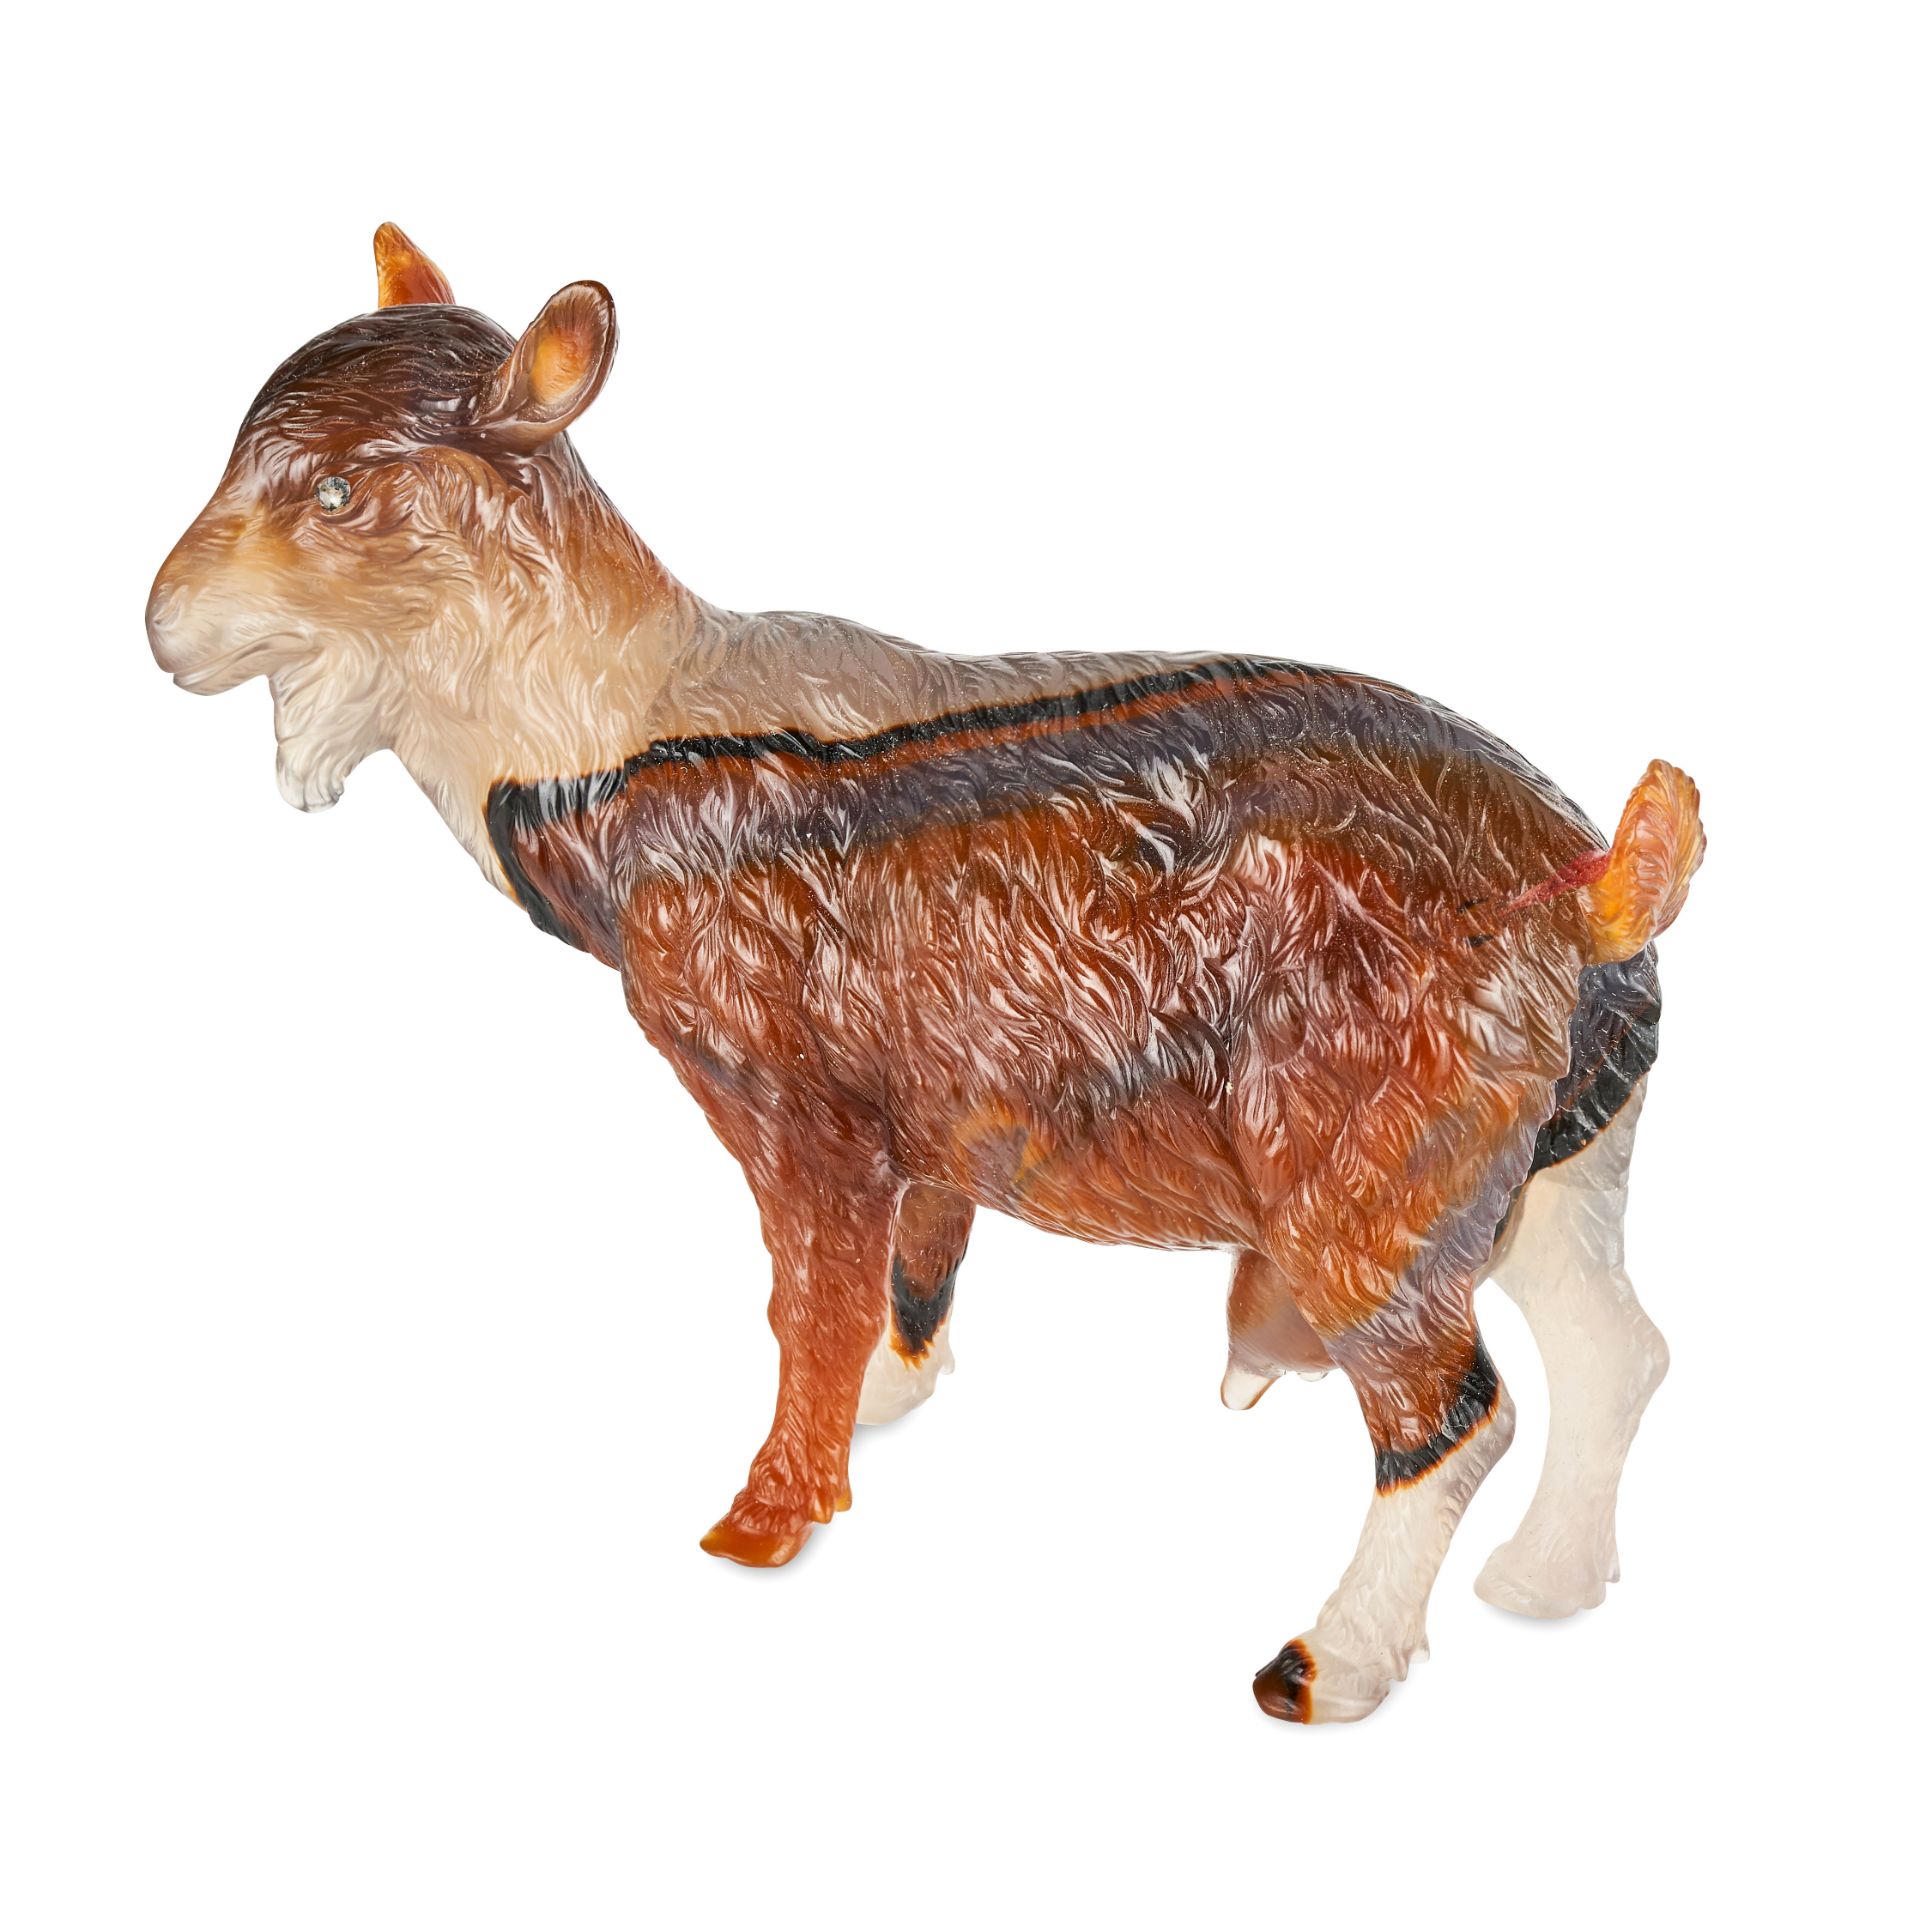 FABERGE, AN EXCEPTIONAL JEWELLED AGATE MODEL OF A SHE GOAT, ST PETERSBURG, CIRCA 1900 - Image 3 of 11